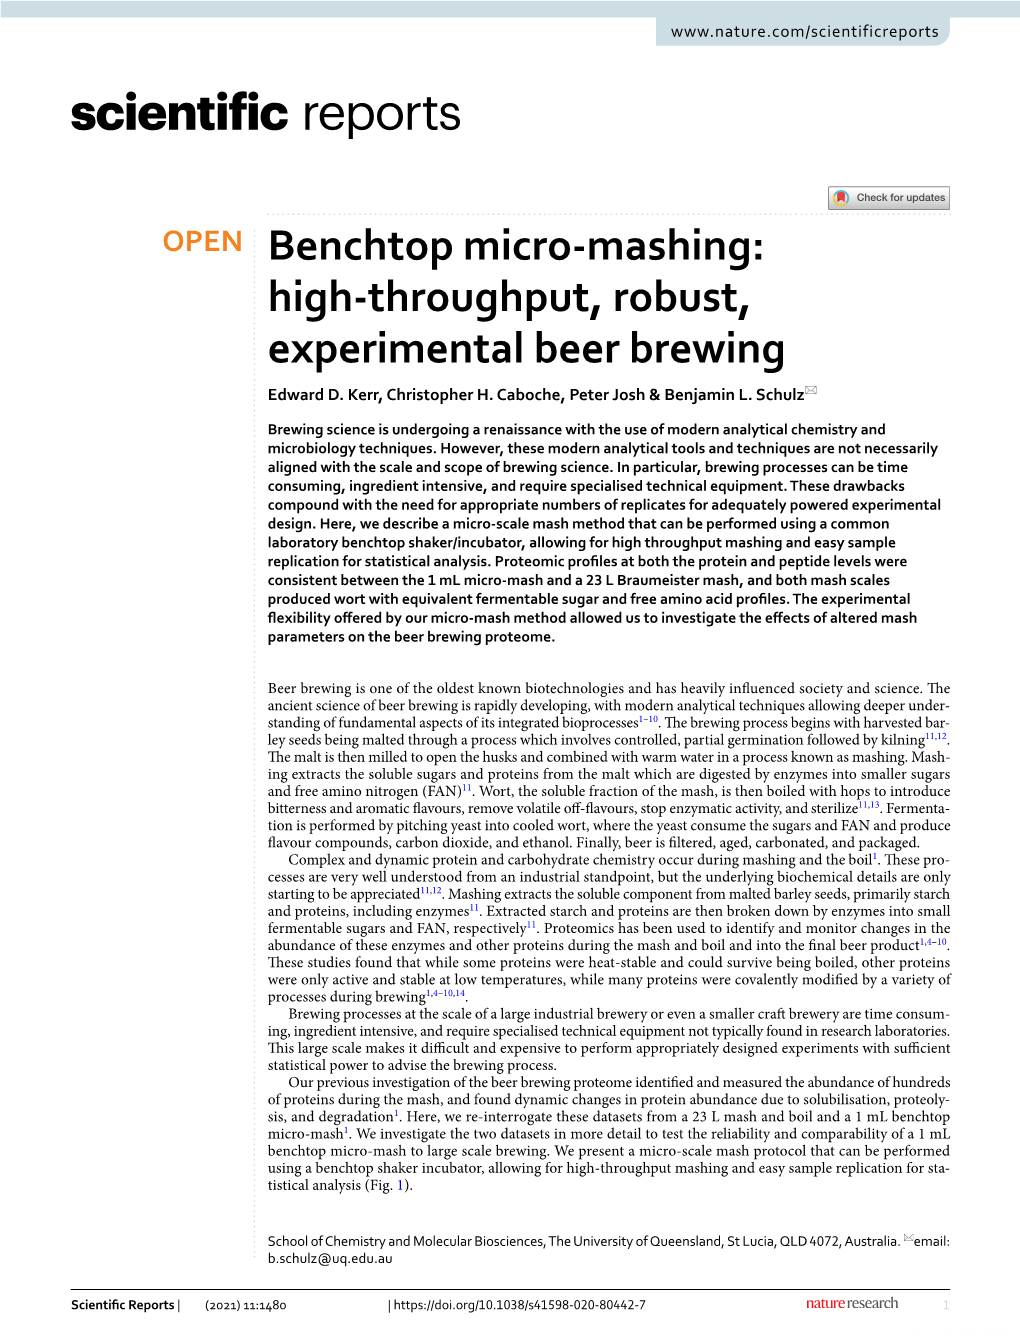 Benchtop Micro-Mashing Method Can Be Used in Lieu of Standard Industrial-Scale Brewing Equipment to Investigate the Molecular Dynamics of the Brewing Process